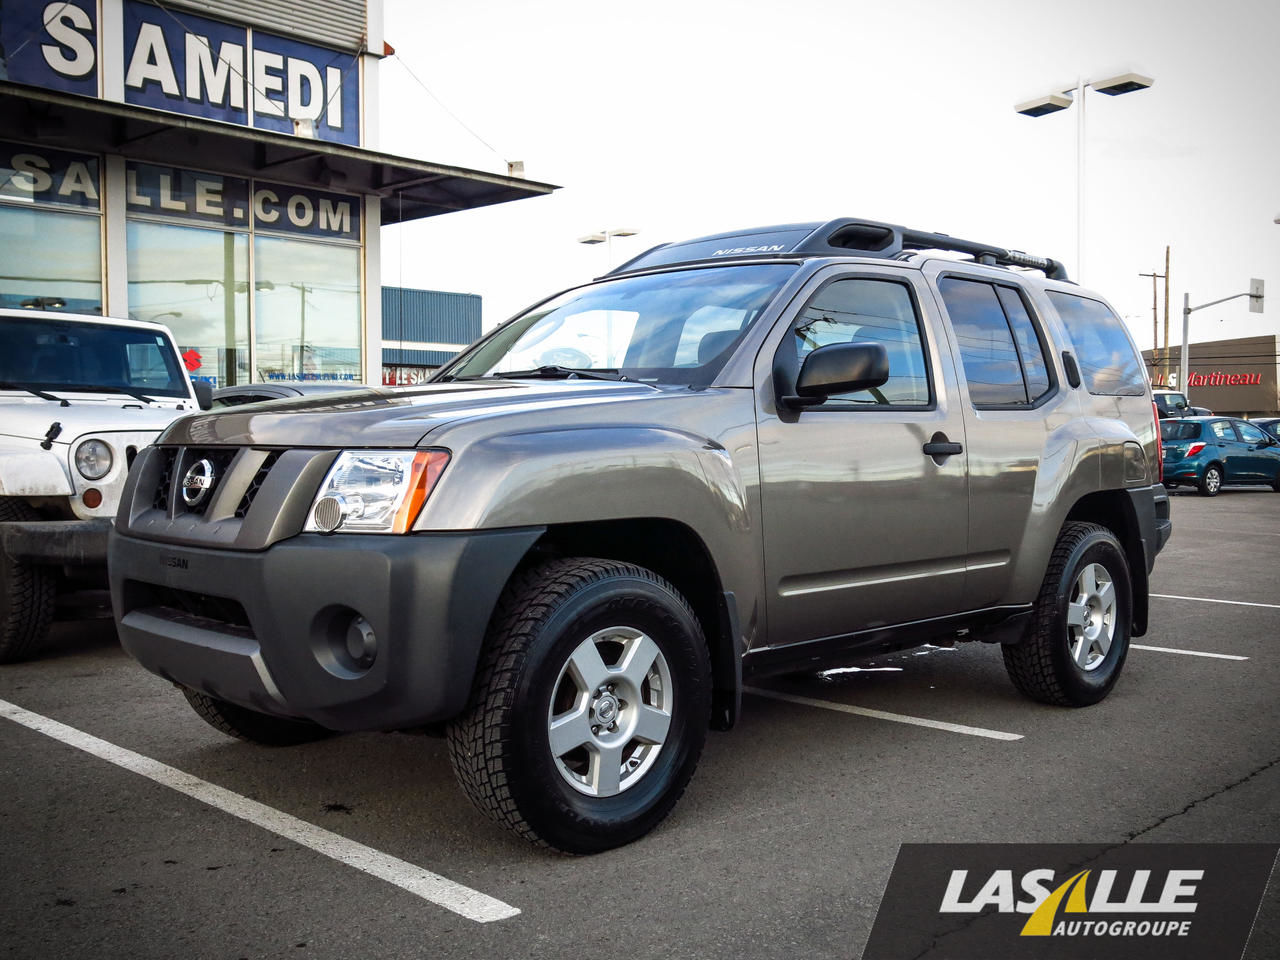 Used nissan xterra pricing #10